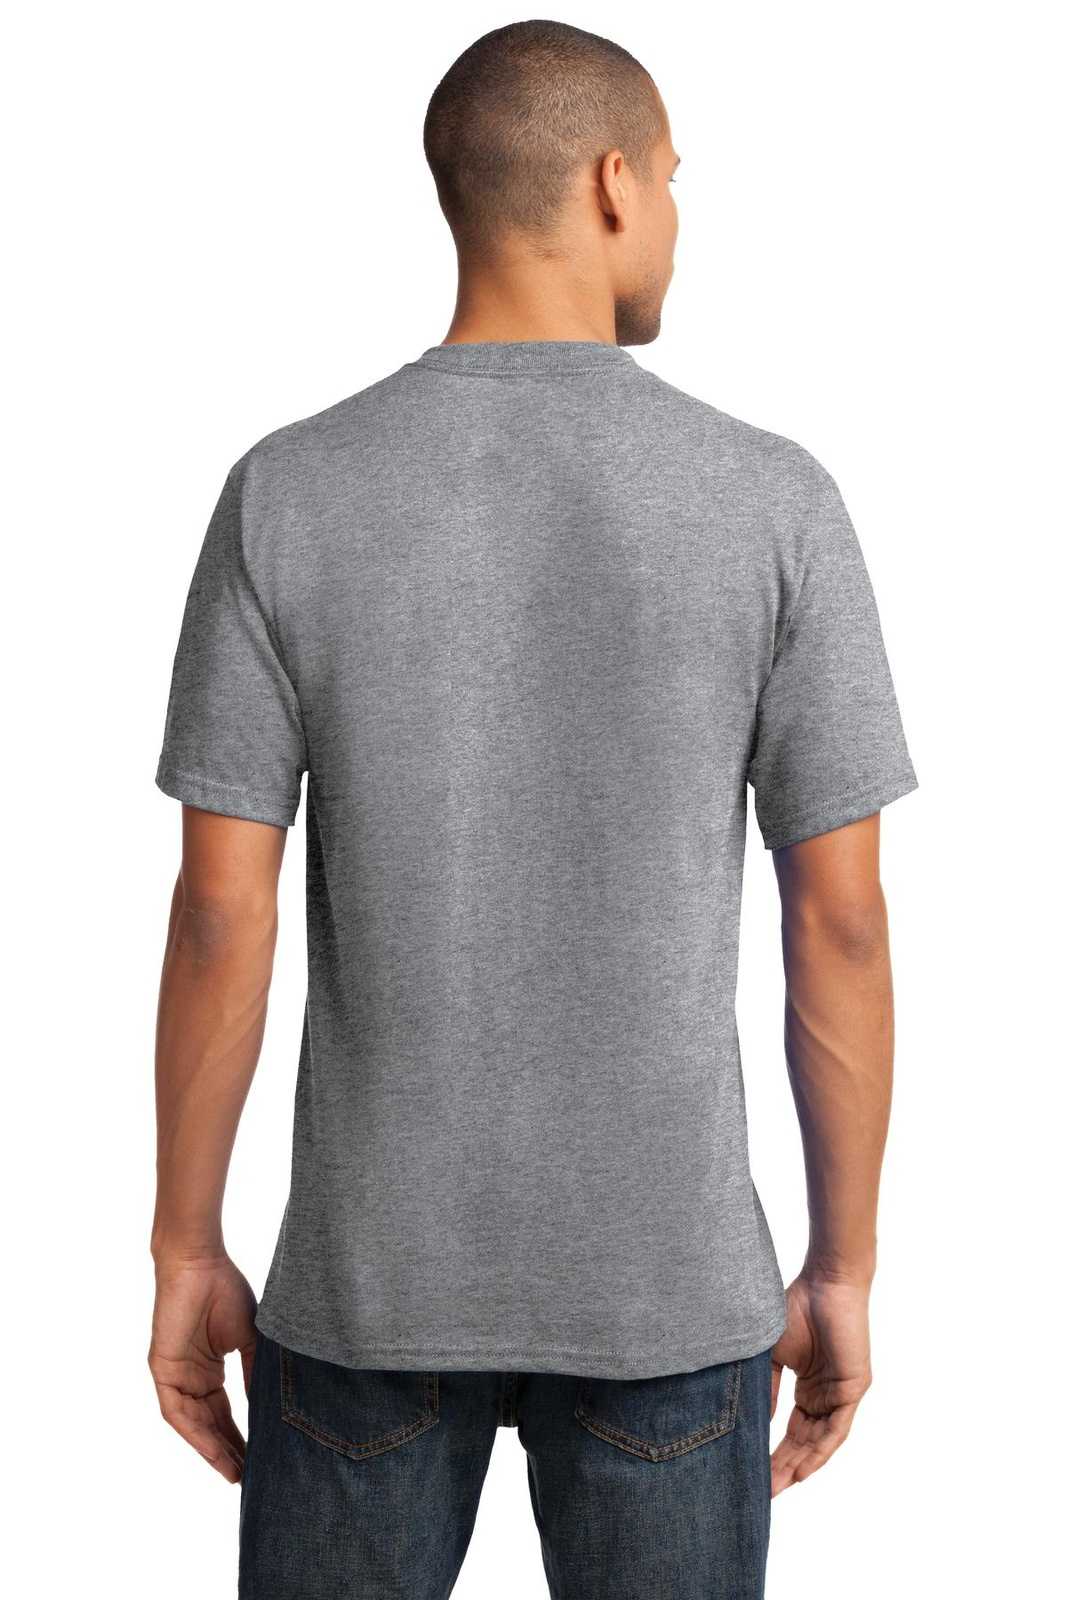 Port & Company PC54V Core Cotton V-Neck Tee - Athletic Heather - HIT a Double - 1